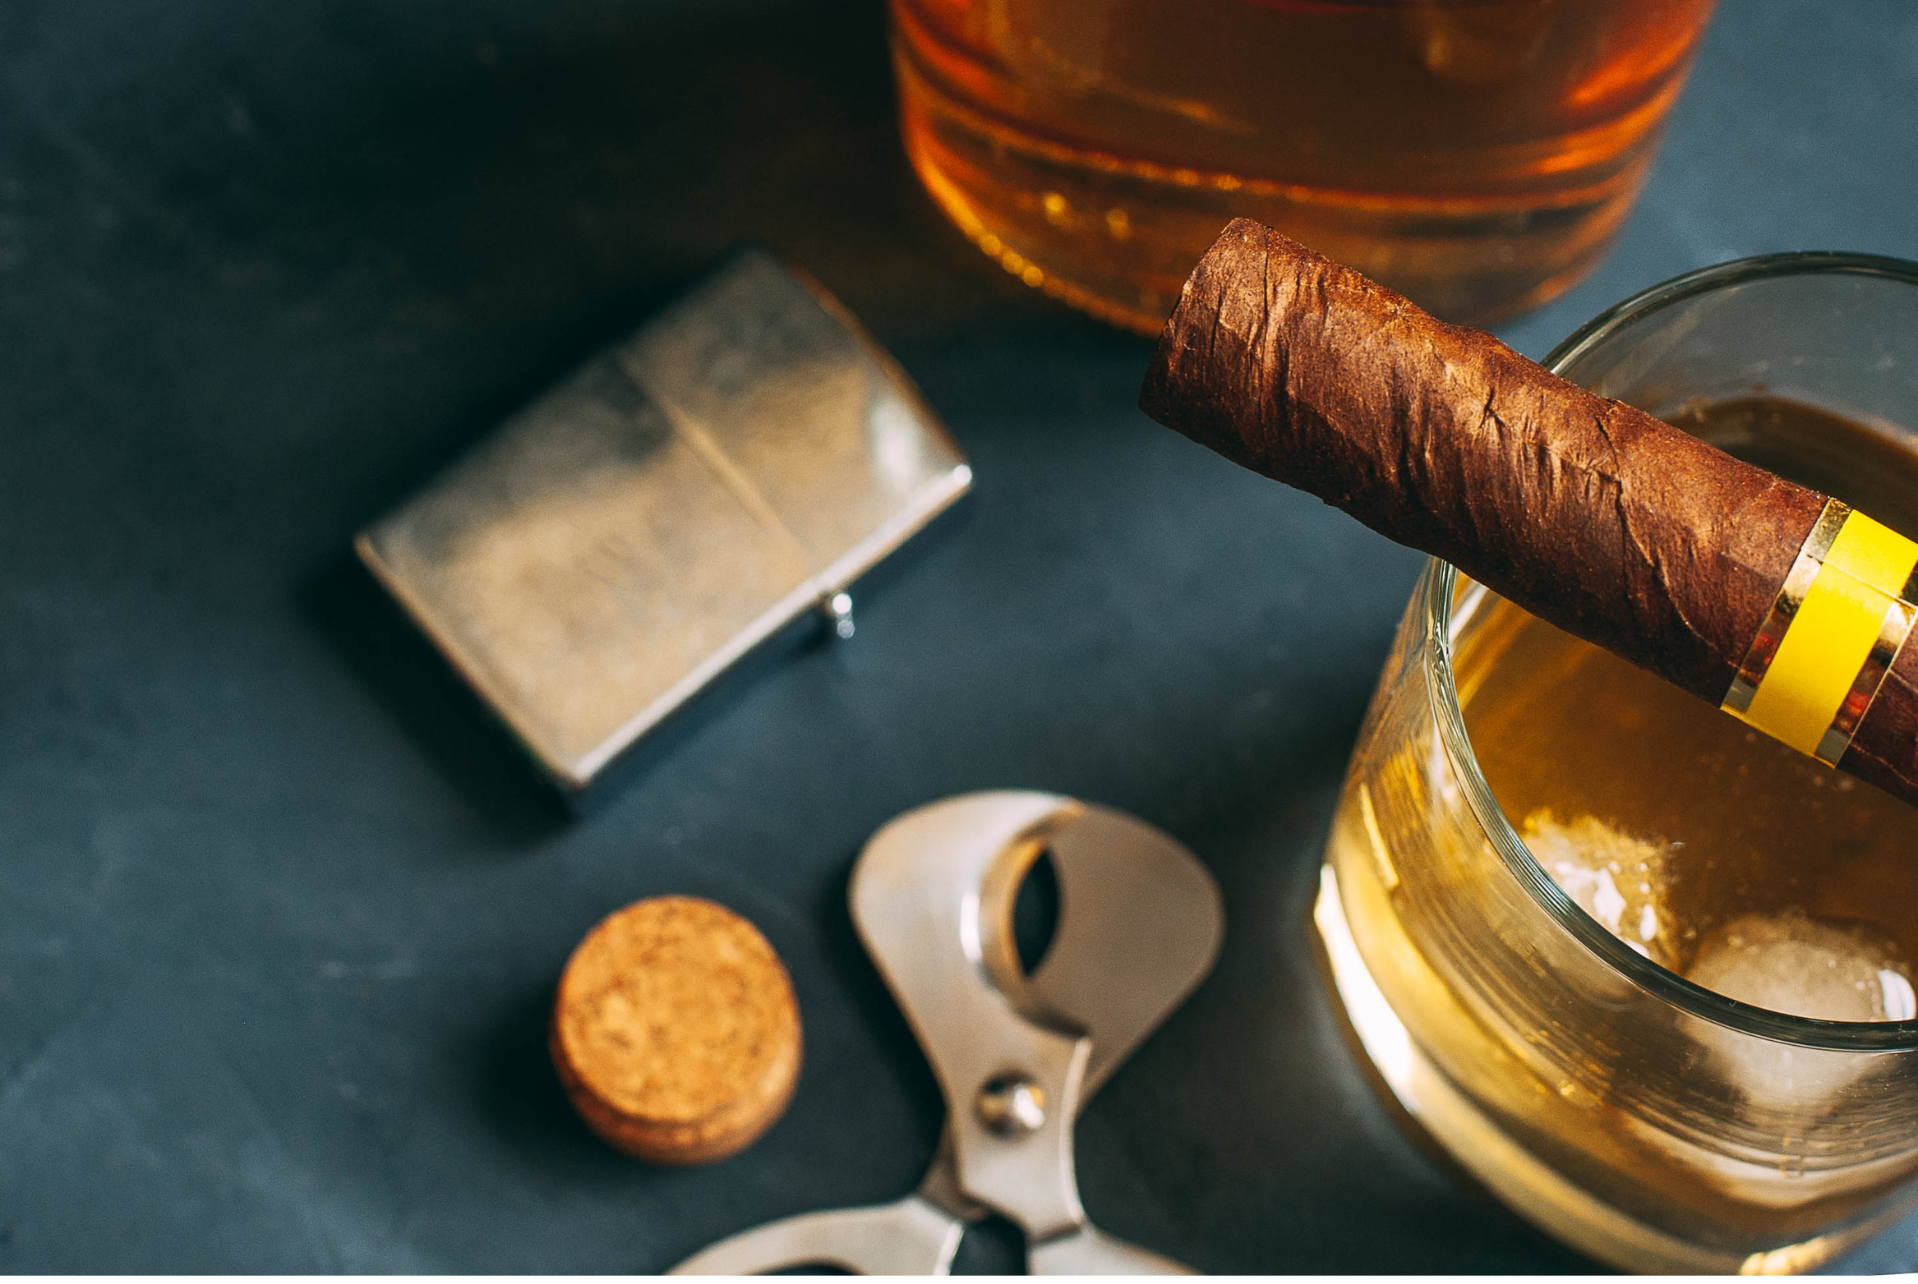 An image of quality cigars and cognac on dark dining accessories, cigar scissors and torch lighter.